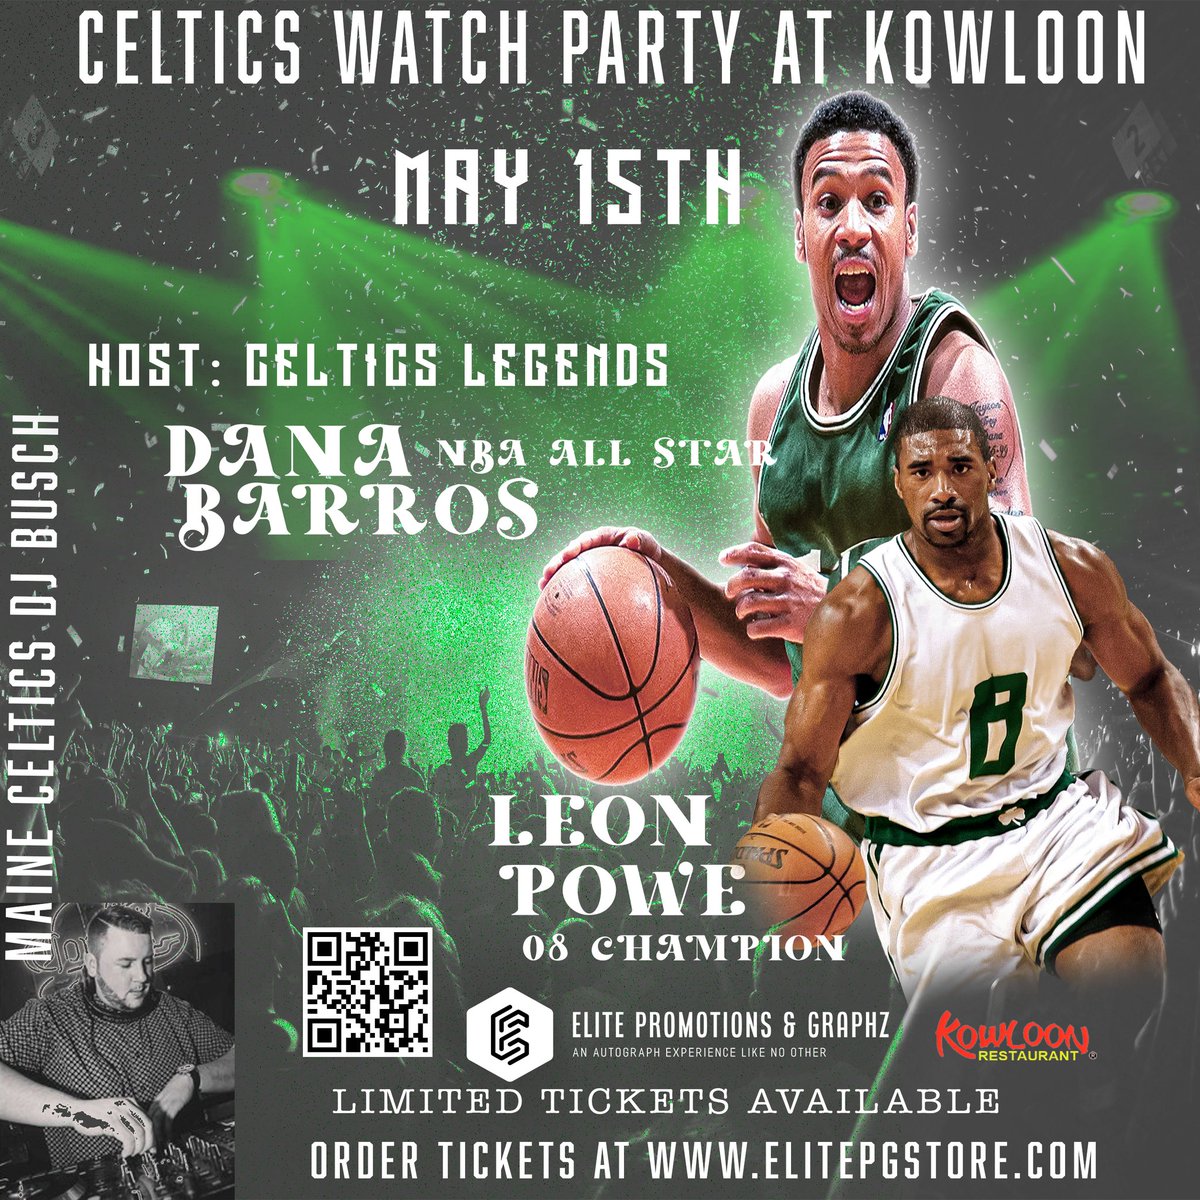 CELTICS WATCH PARTY @KowloonSaugus HOSTS LEGENDS DANA BARROS & LEON POWE. Hosts for the night best shooters in the world Dana Barros & 08 Champ Leon Powe. Watch Celtics game & enjoy a fun filled night music, food, and drinks ORDER TICKETS elitepgstore.com